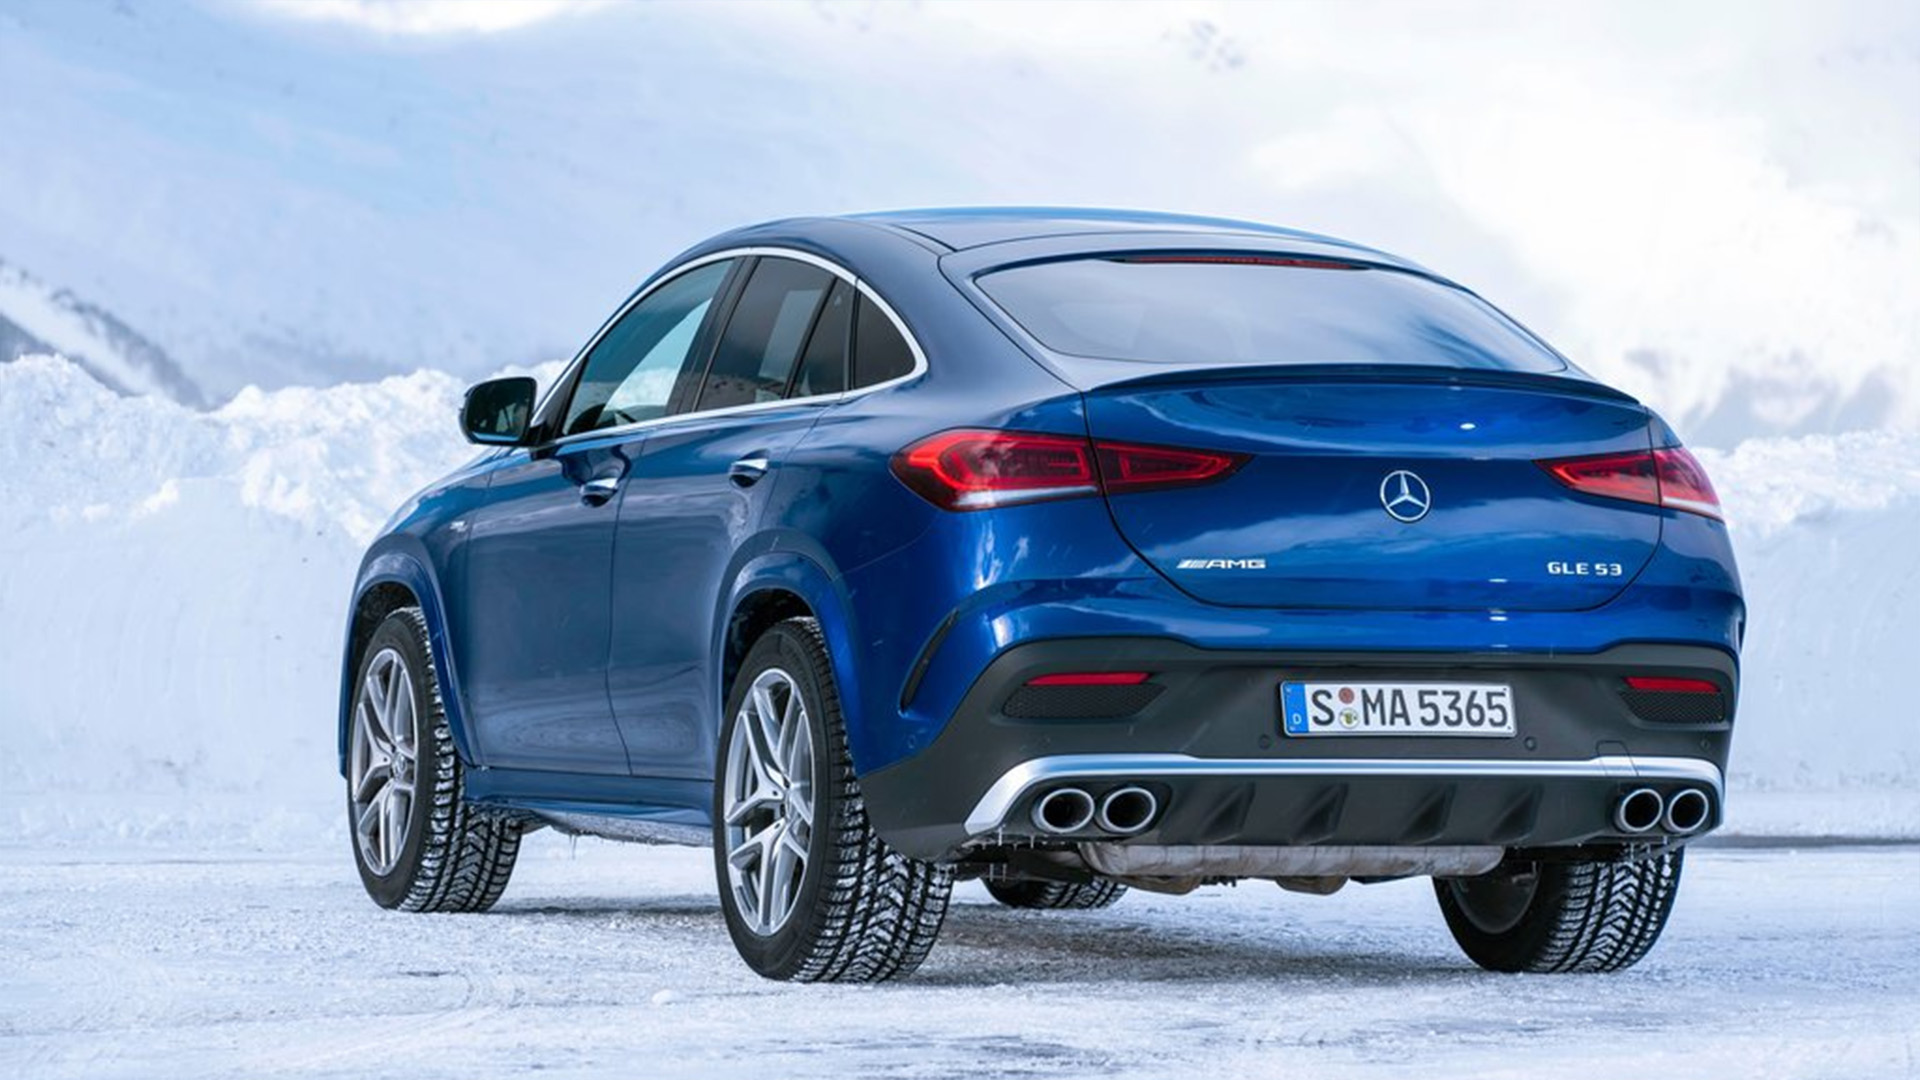 Mercedes-Benz GLE53 AMG 4Matic Coupe